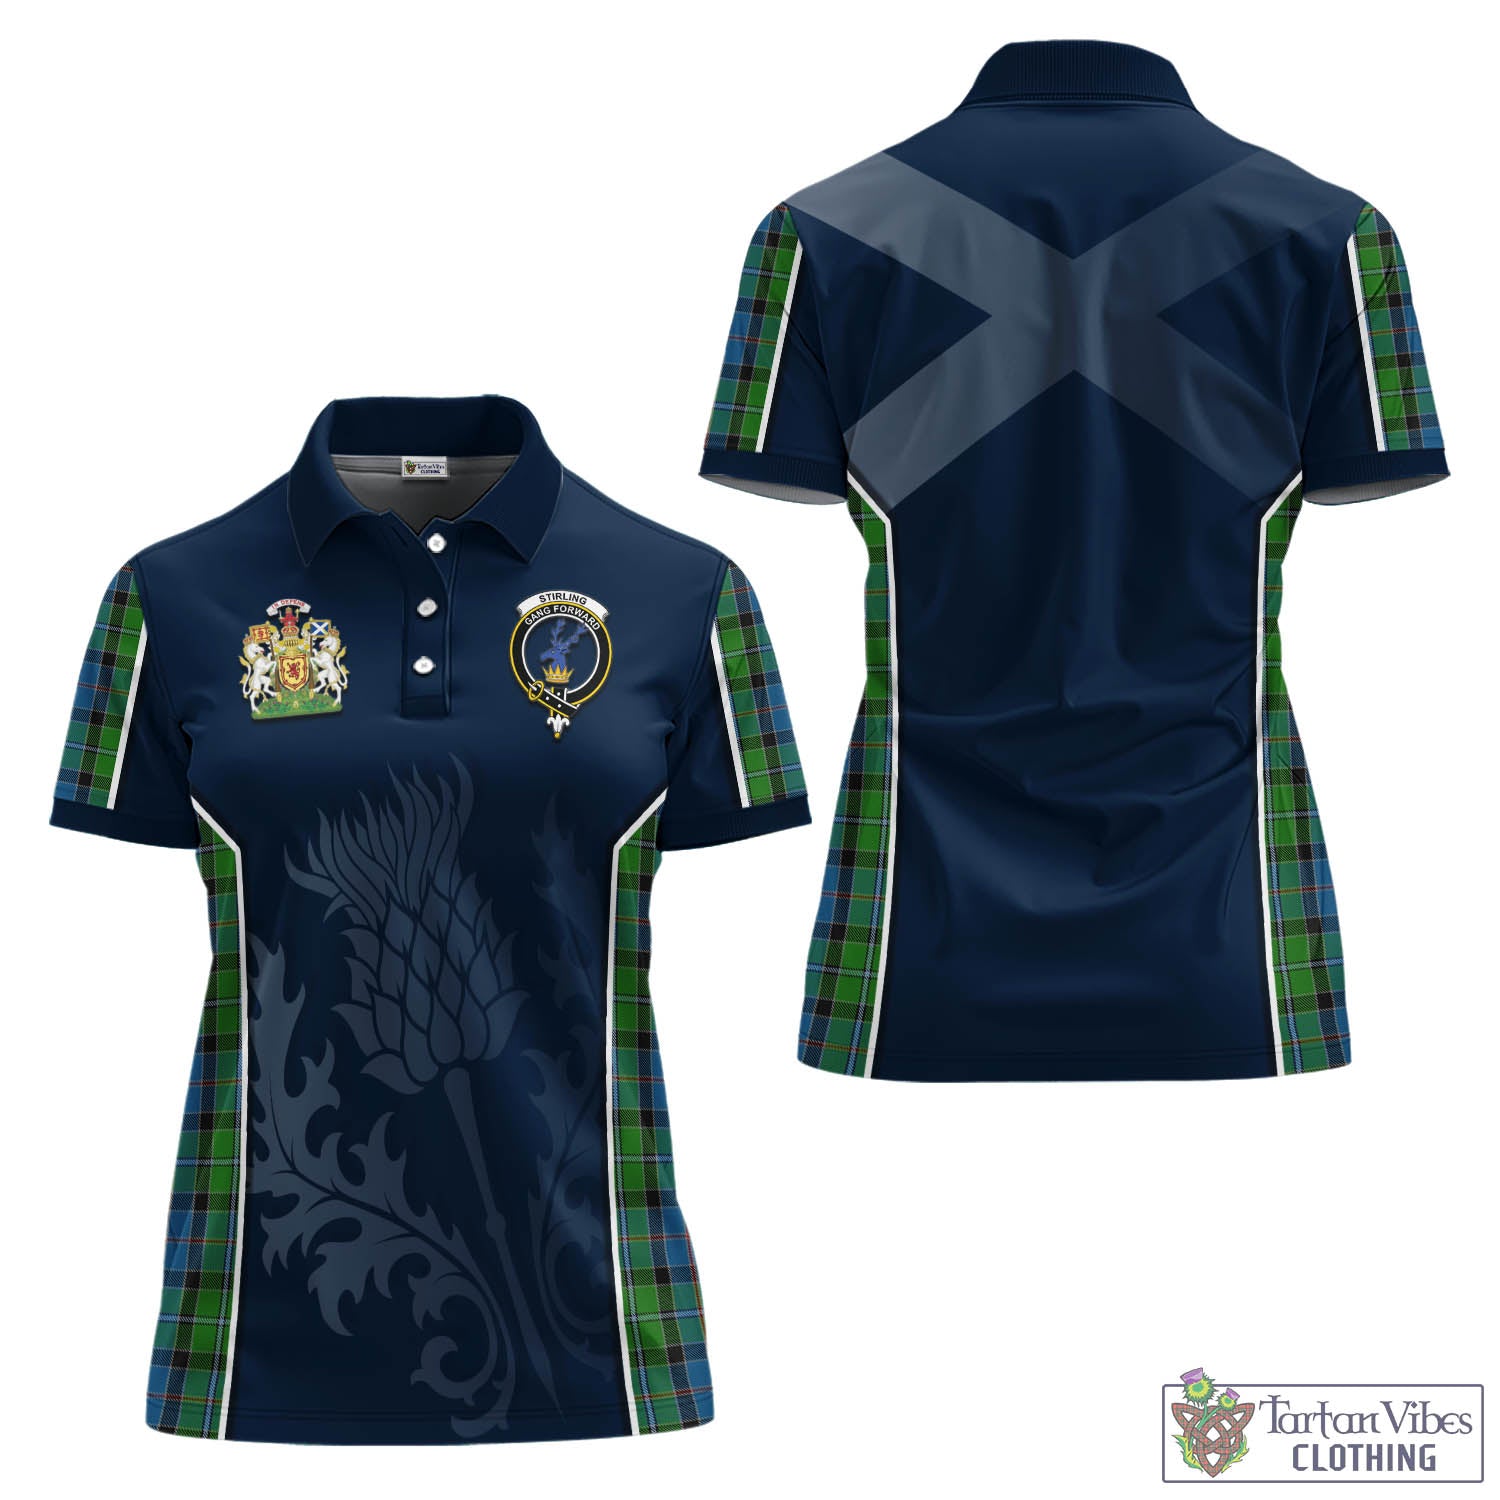 Tartan Vibes Clothing Stirling Tartan Women's Polo Shirt with Family Crest and Scottish Thistle Vibes Sport Style